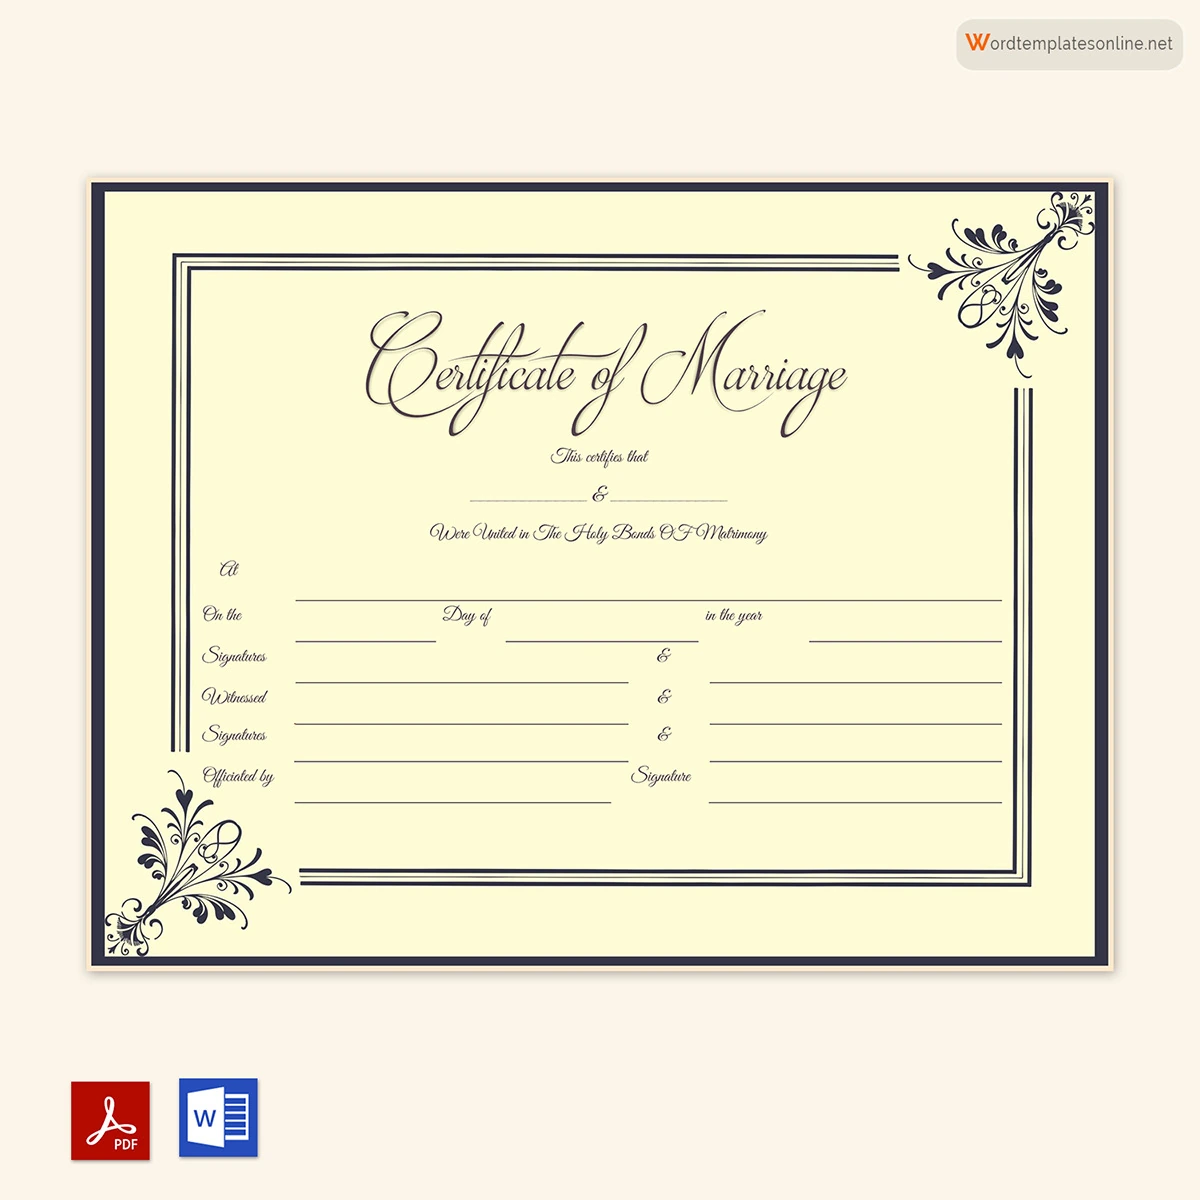 marriage certificate template microsoft word